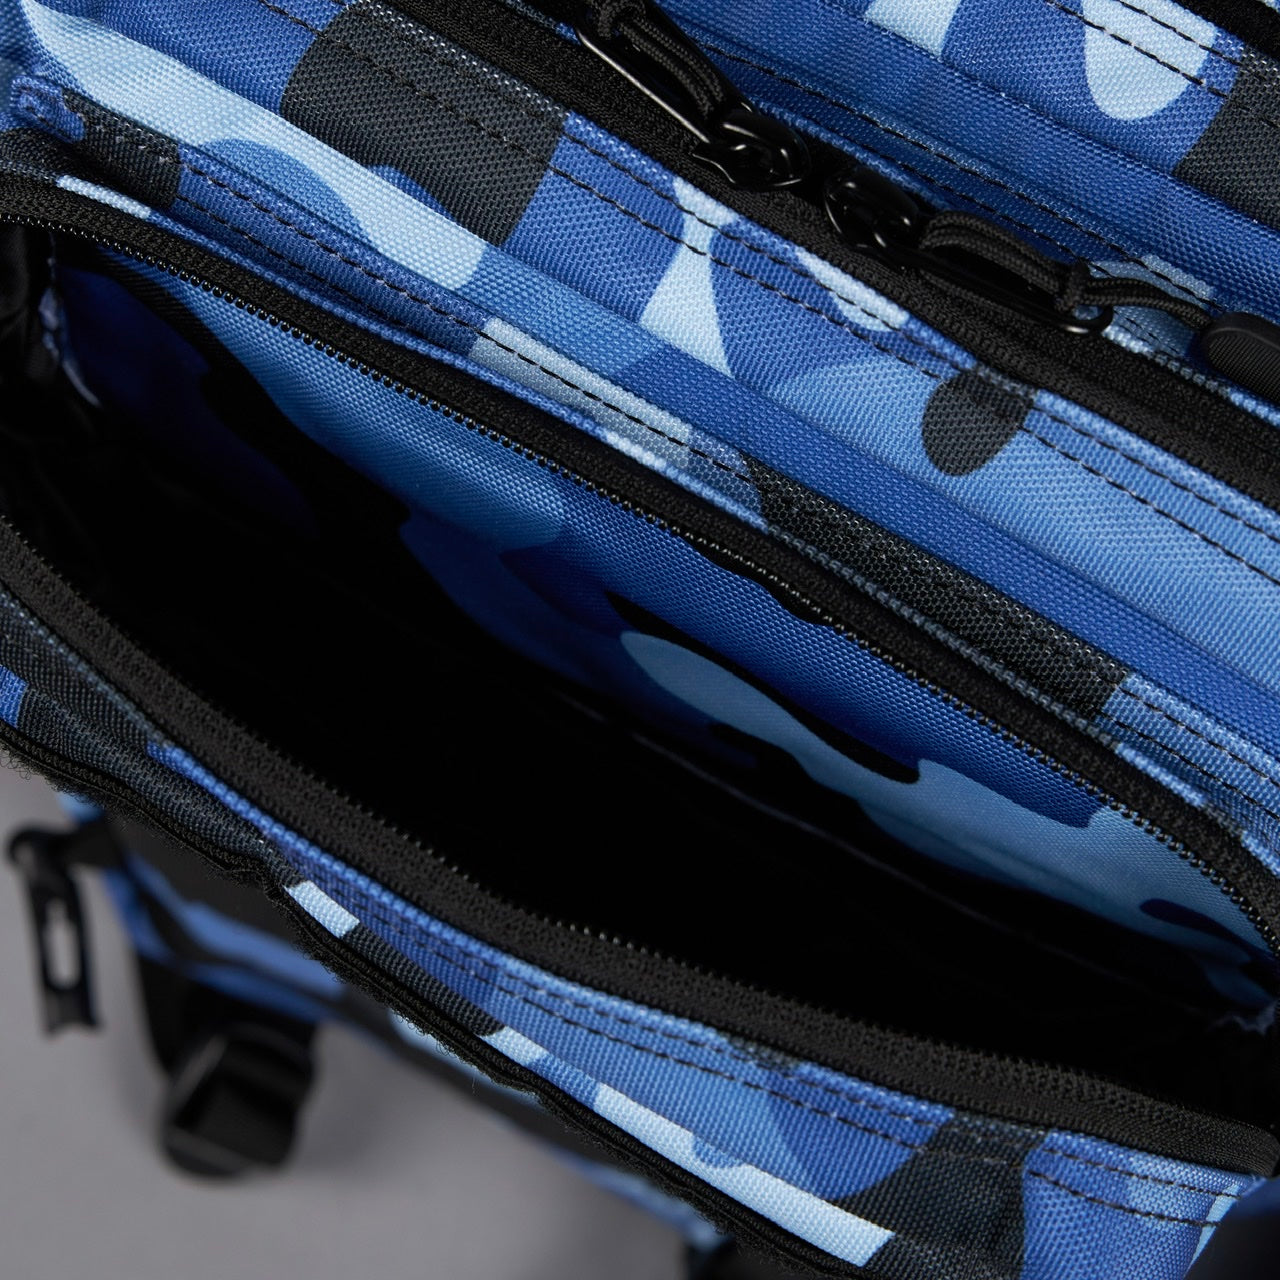 25L Backpack Black And Blue Camo